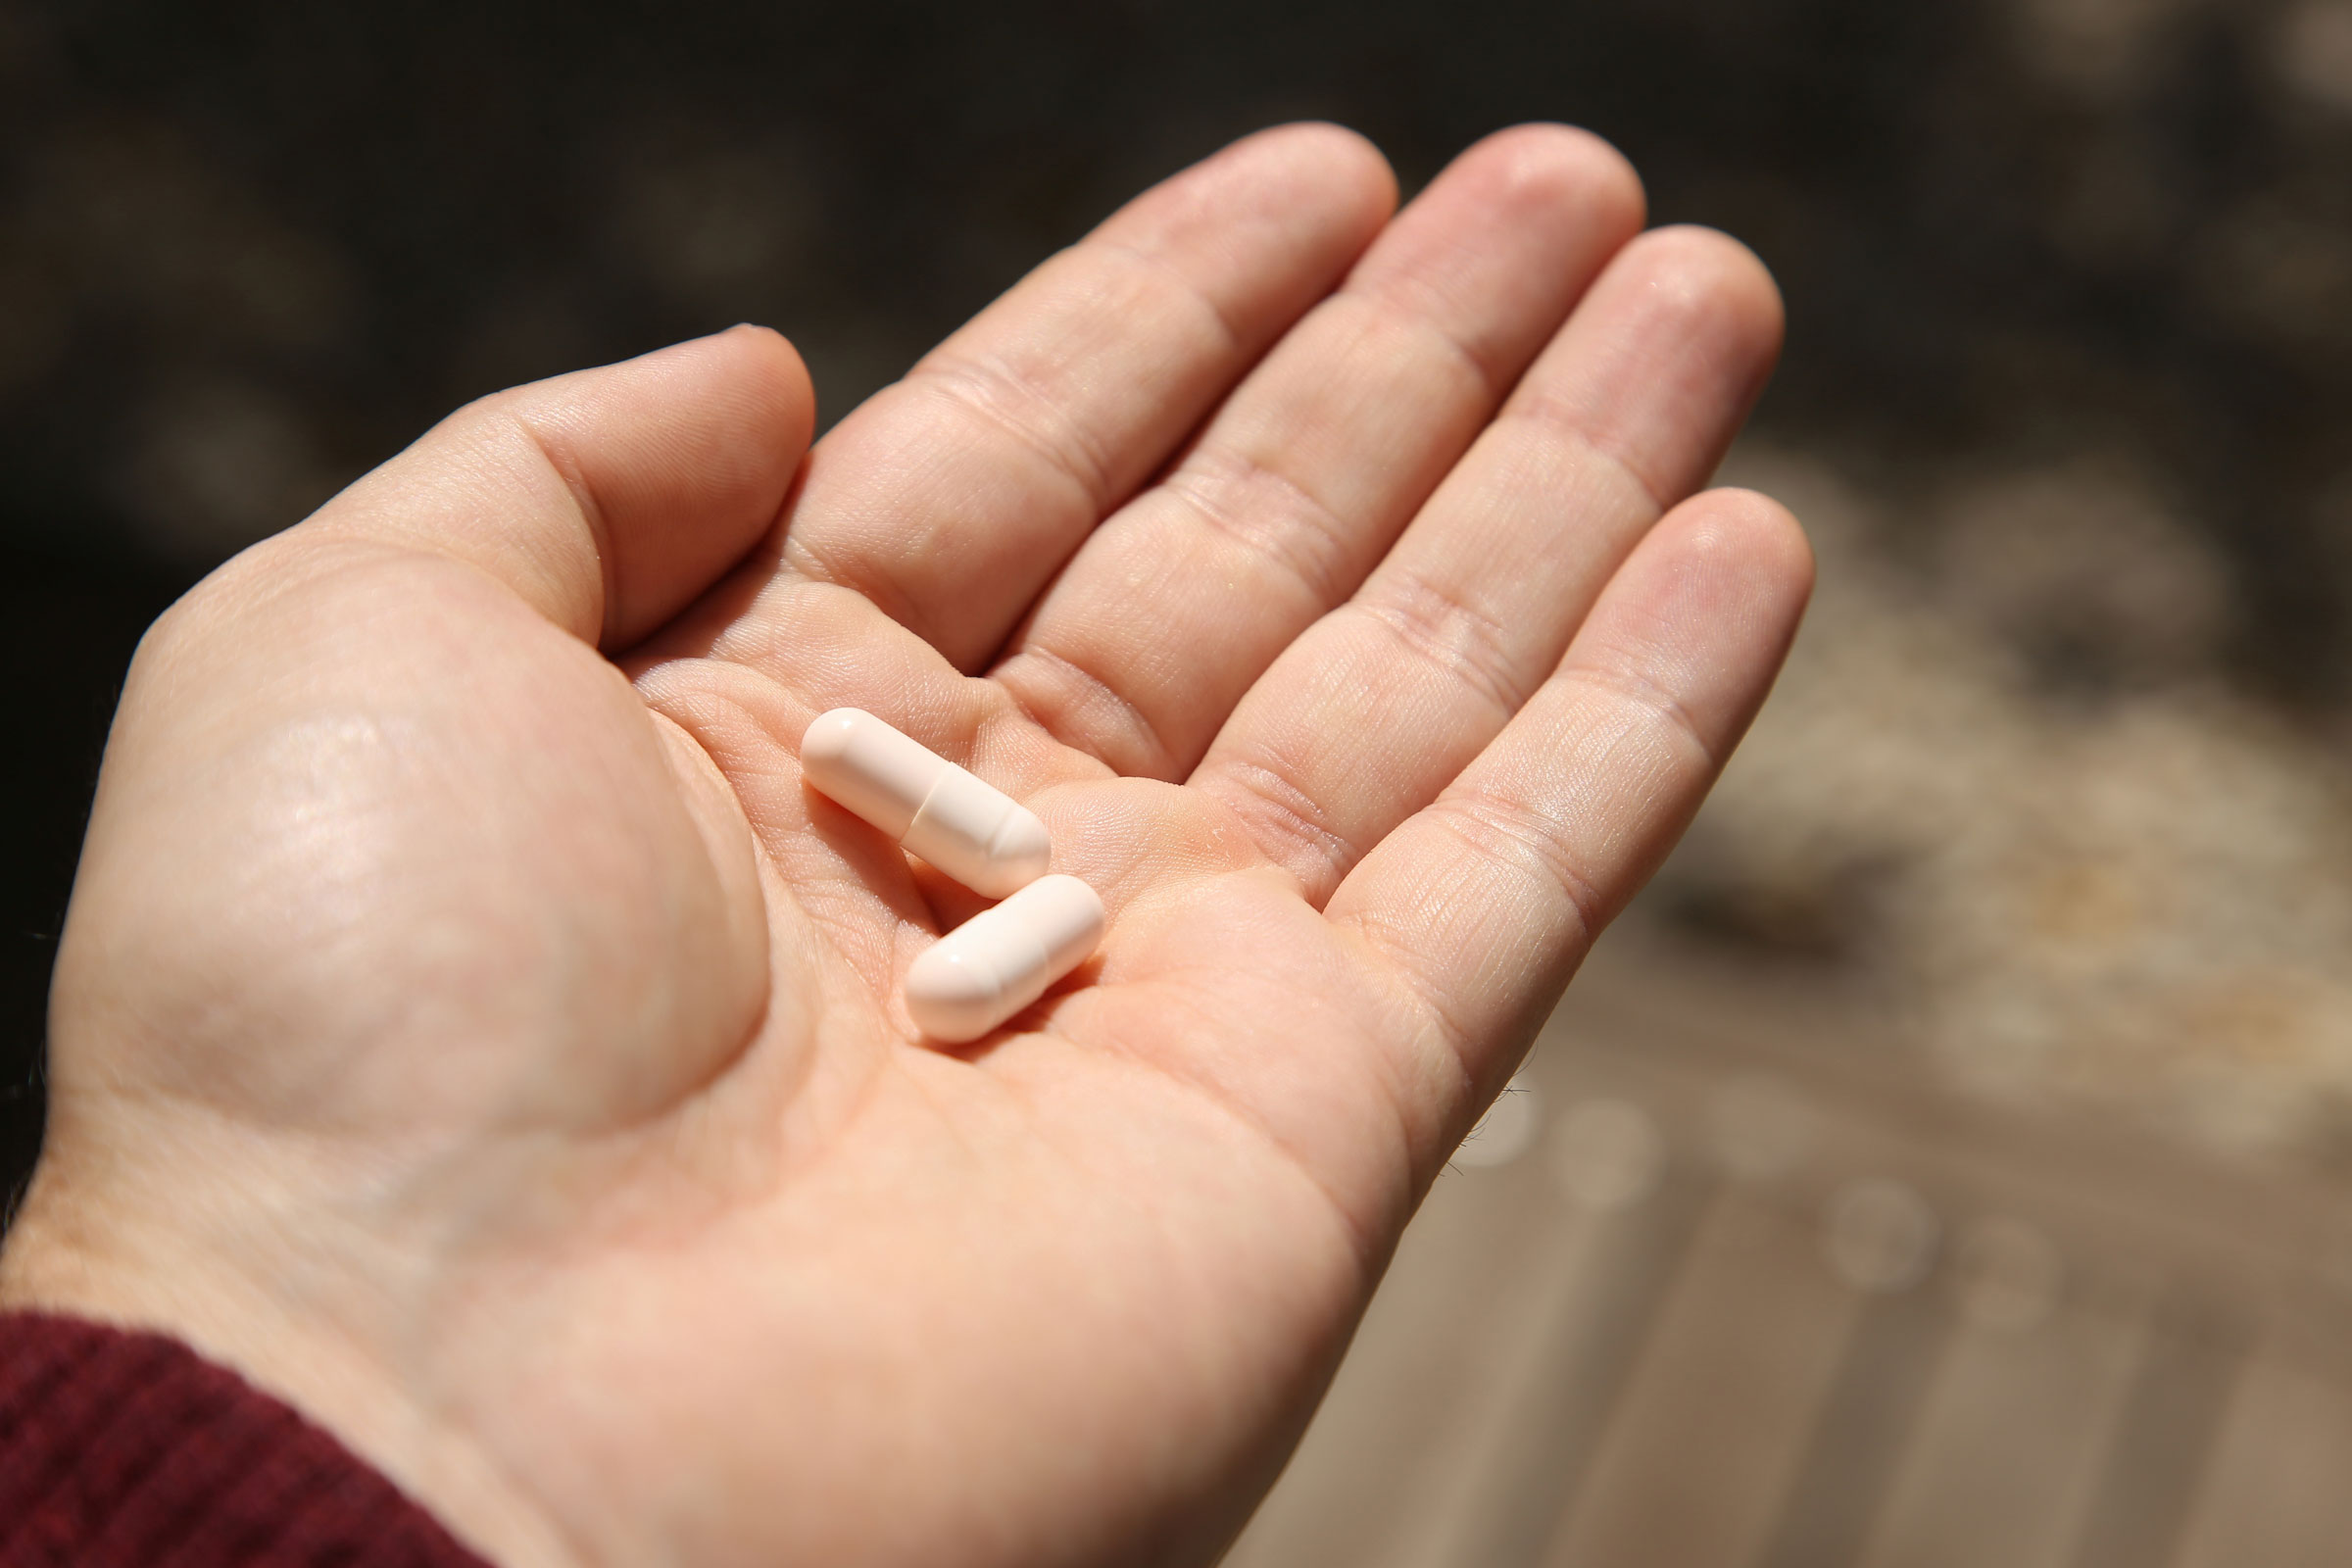 A hand holding two white pills in the palm